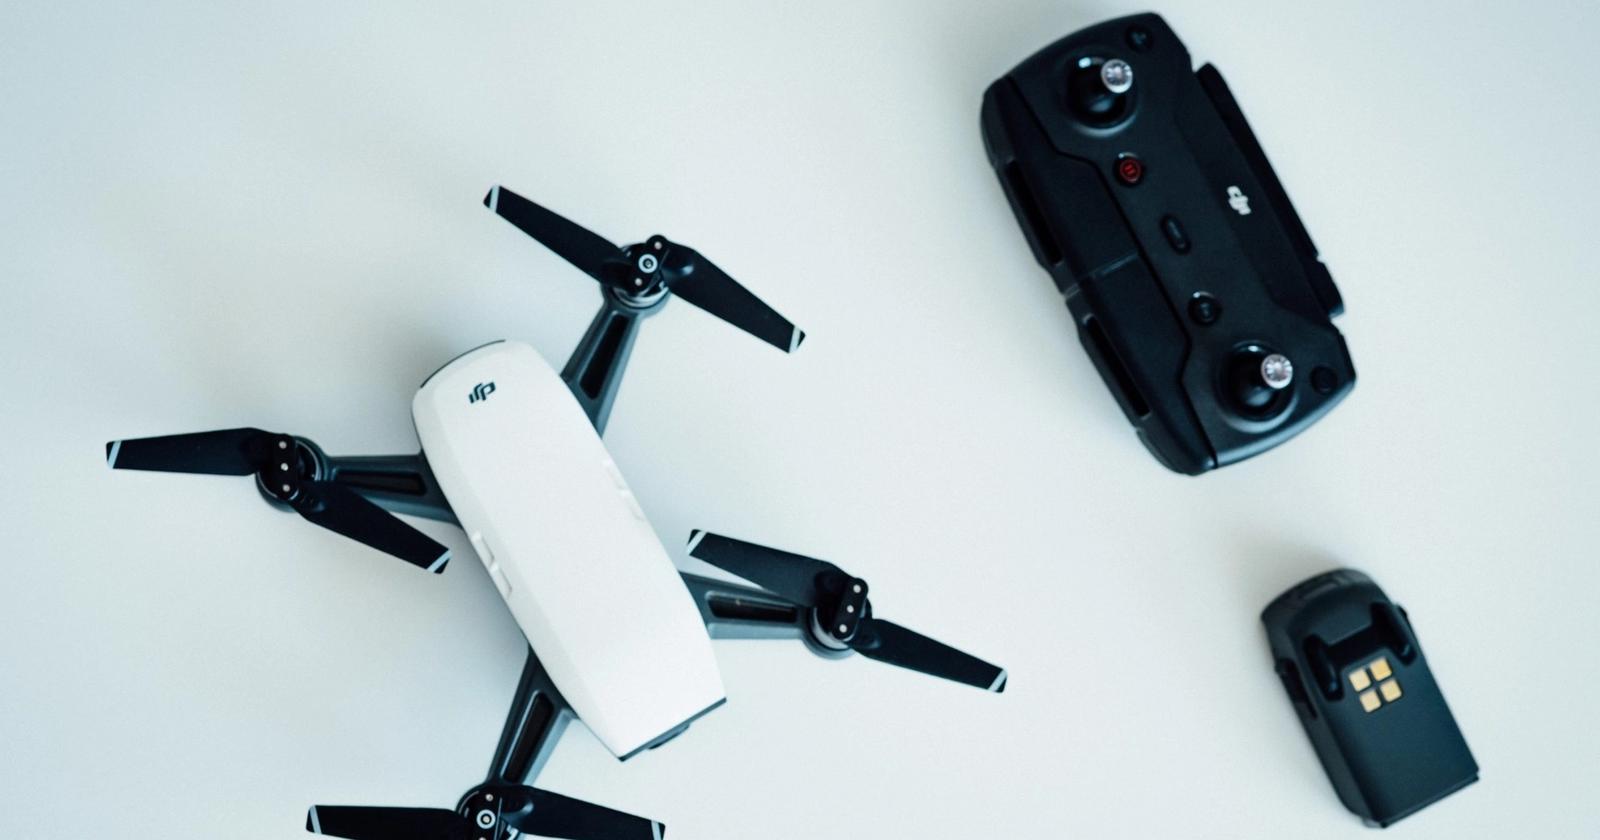 How to Activate the DJI Avata (Step-by-Step Guide) – Droneblog